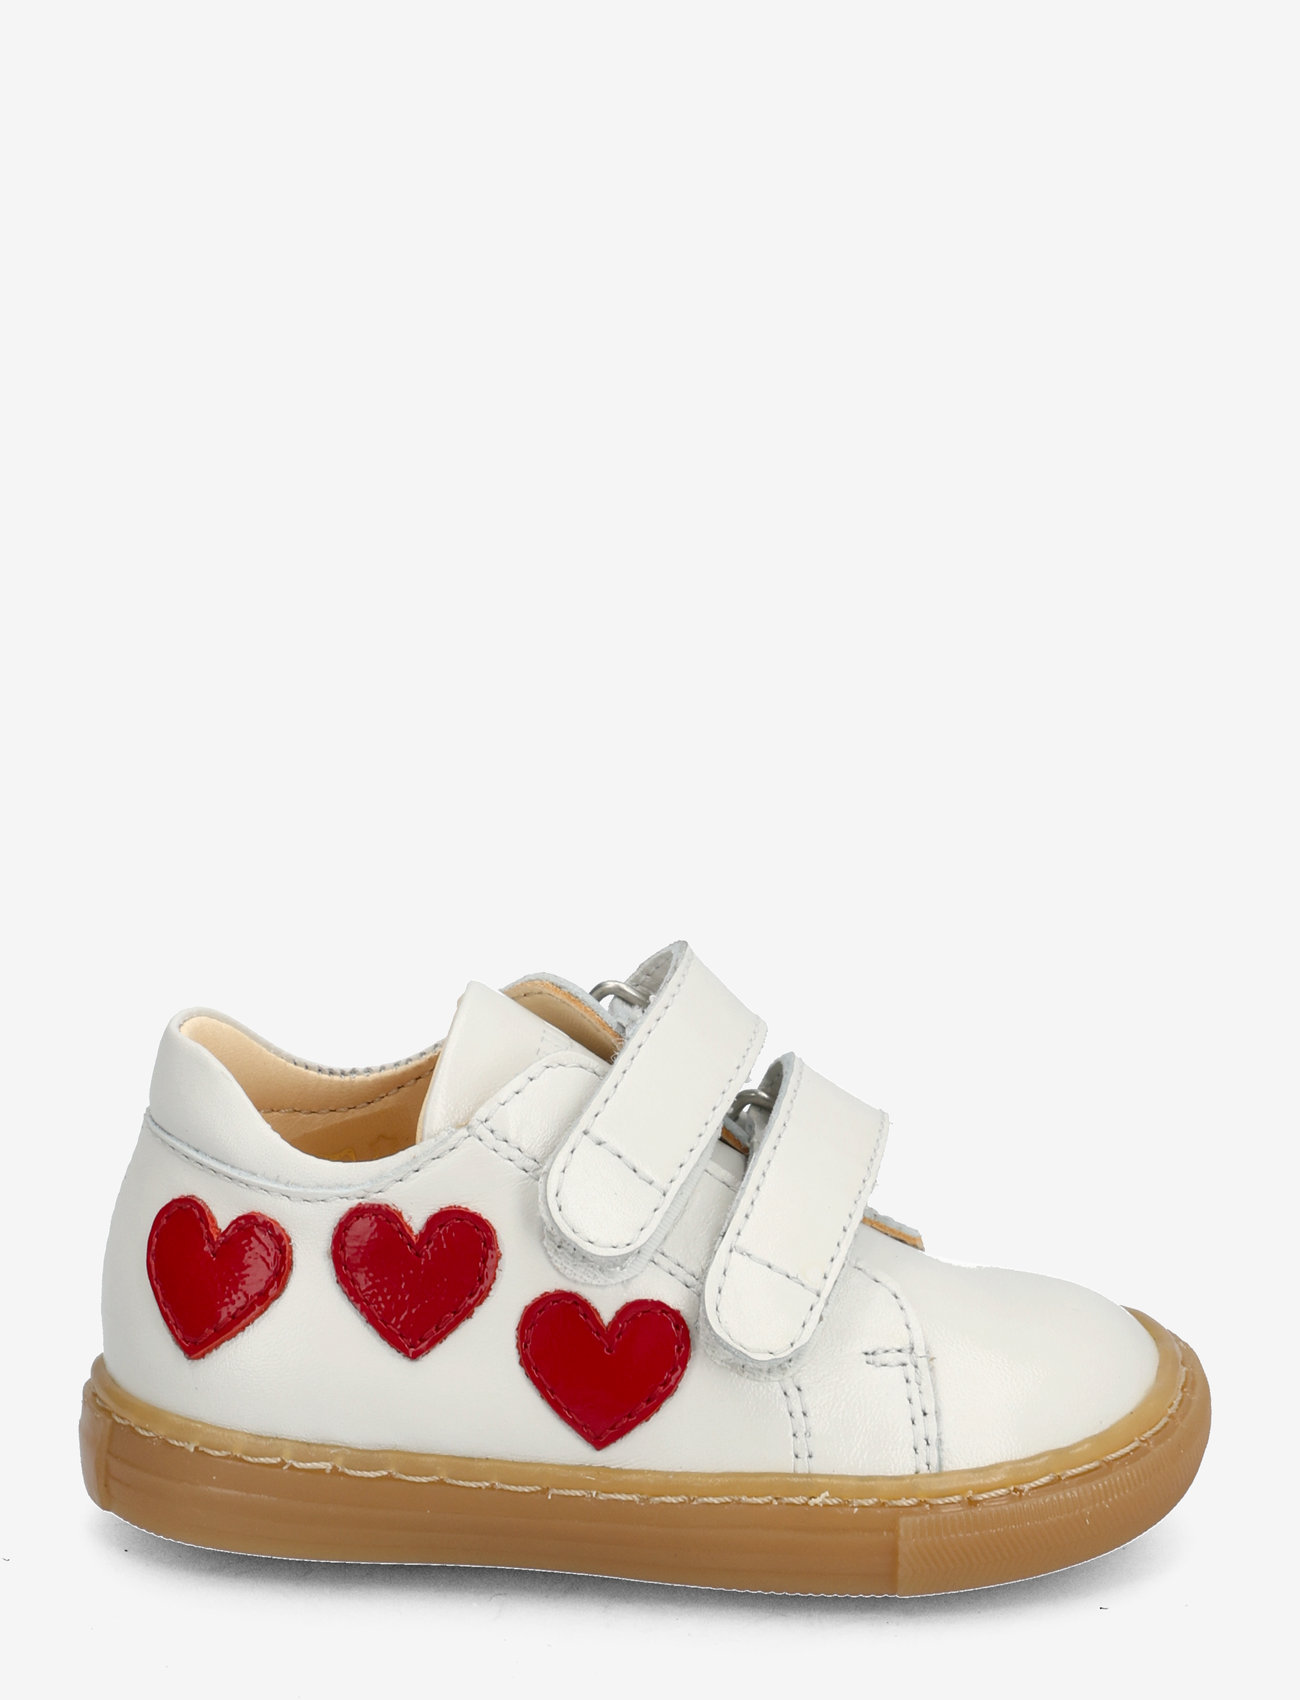 ANGULUS - Shoes - flat - with velcro - sommerschnäppchen - 1493/a003 off white/hearts - 1